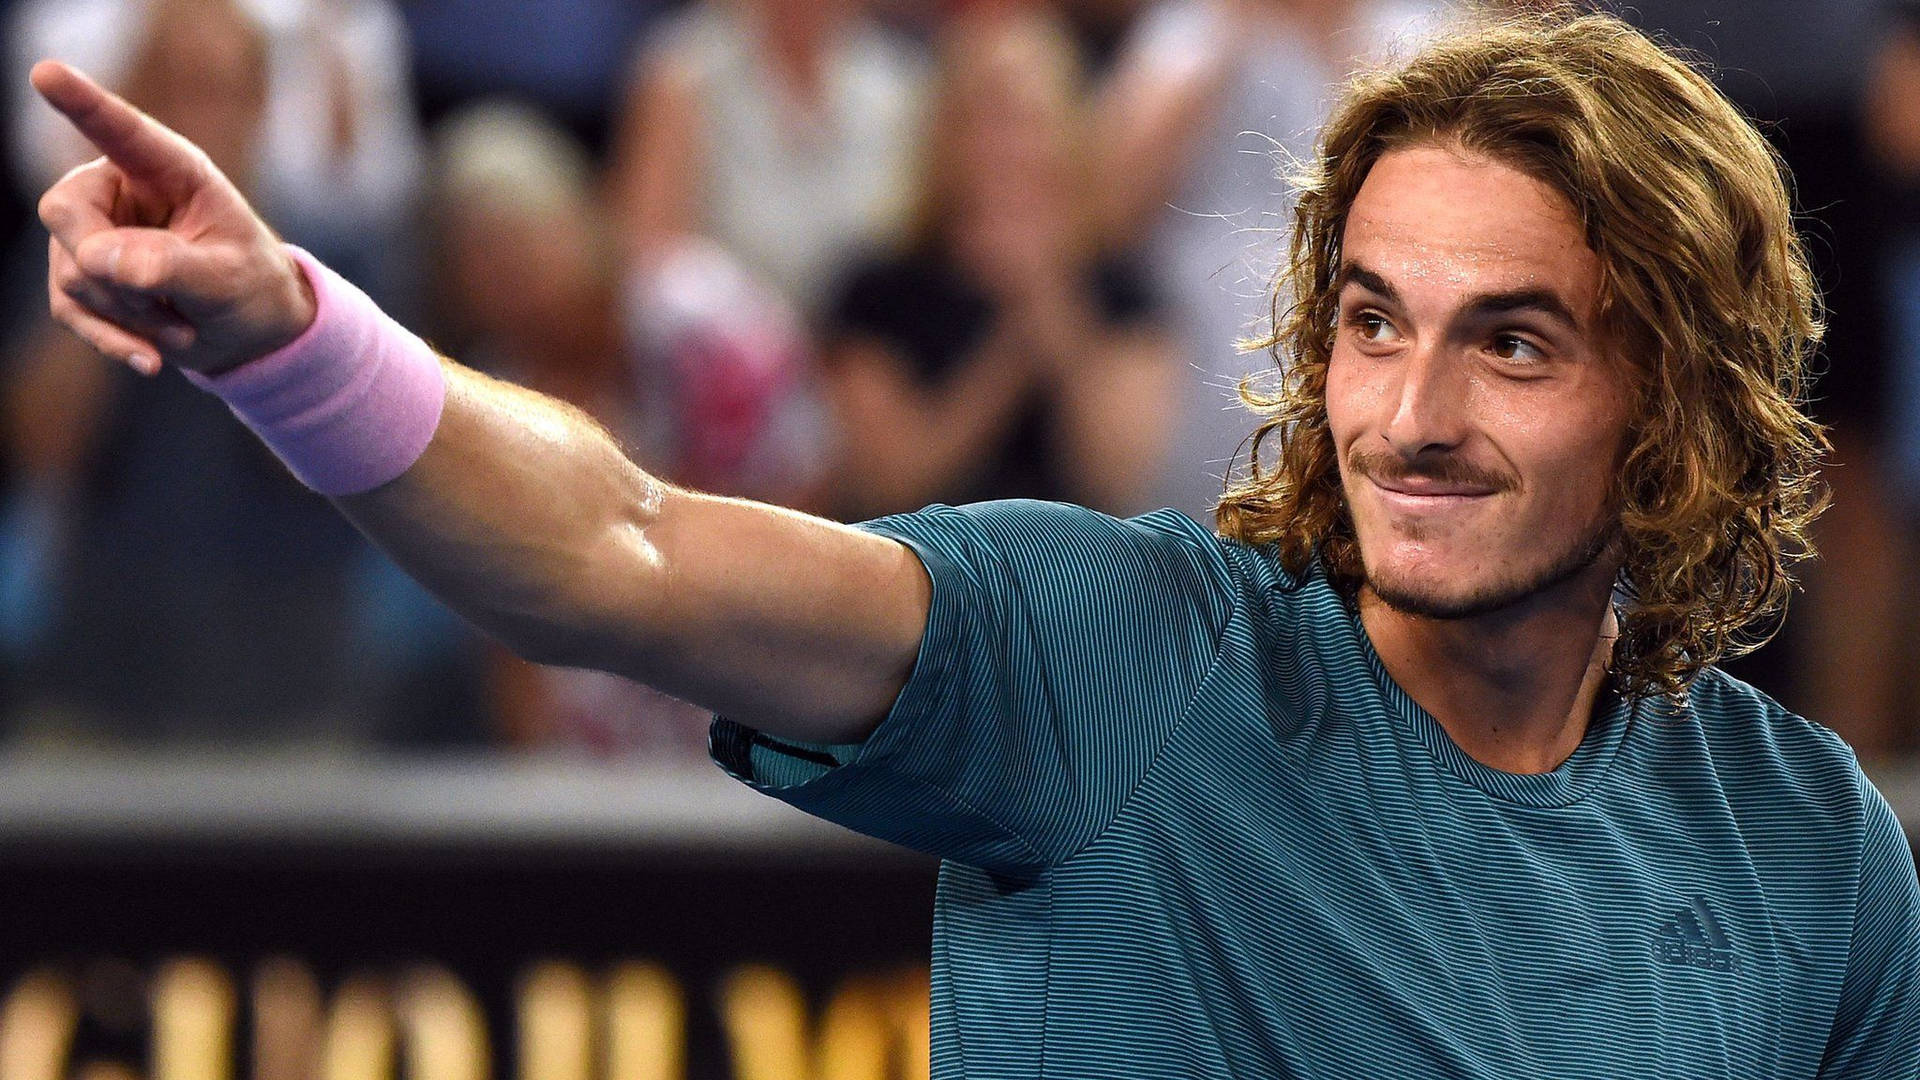 Stefanos Tsitsipas Smiling At Crowd Background